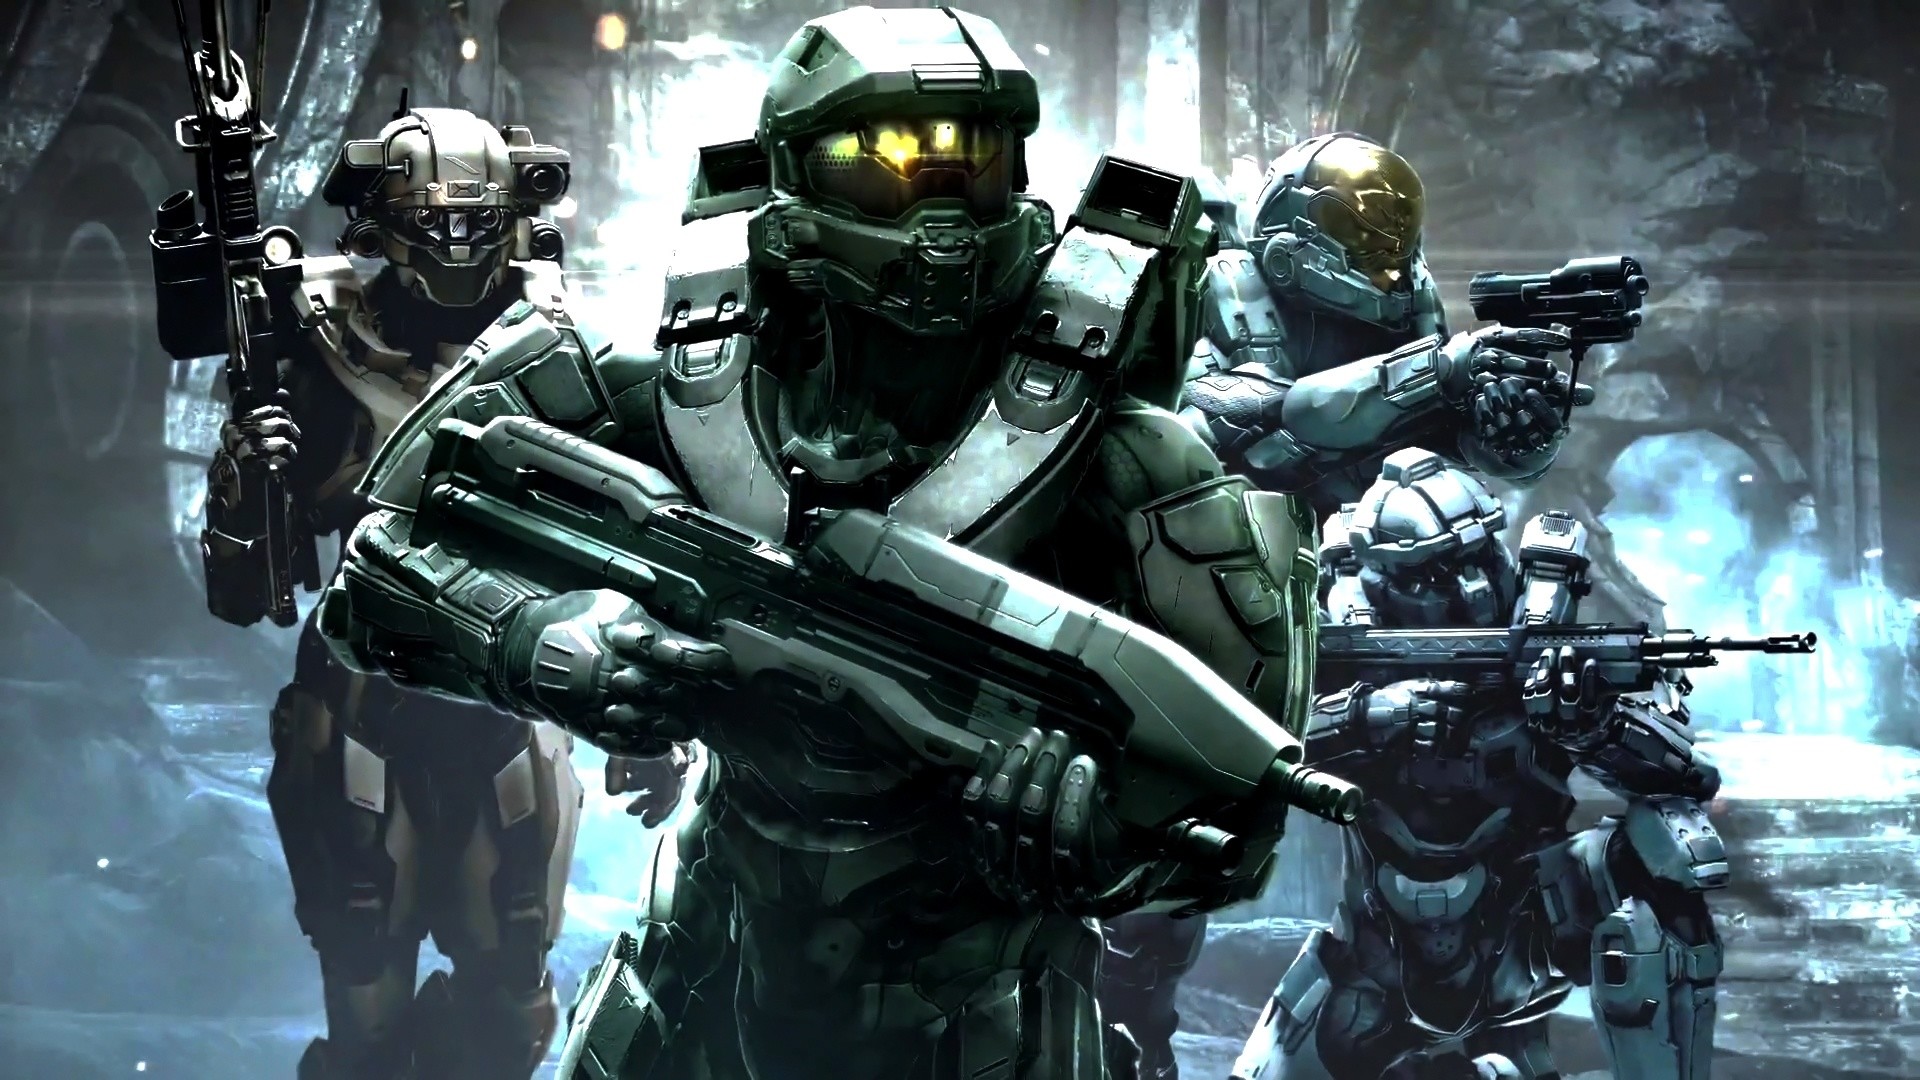 1920x1080 halo 5 master chief wallpapers for laptops cool images high definition  artwork colourful pictures desktop wallpapers mac desktop images 1080p  1920Ã1080 ...